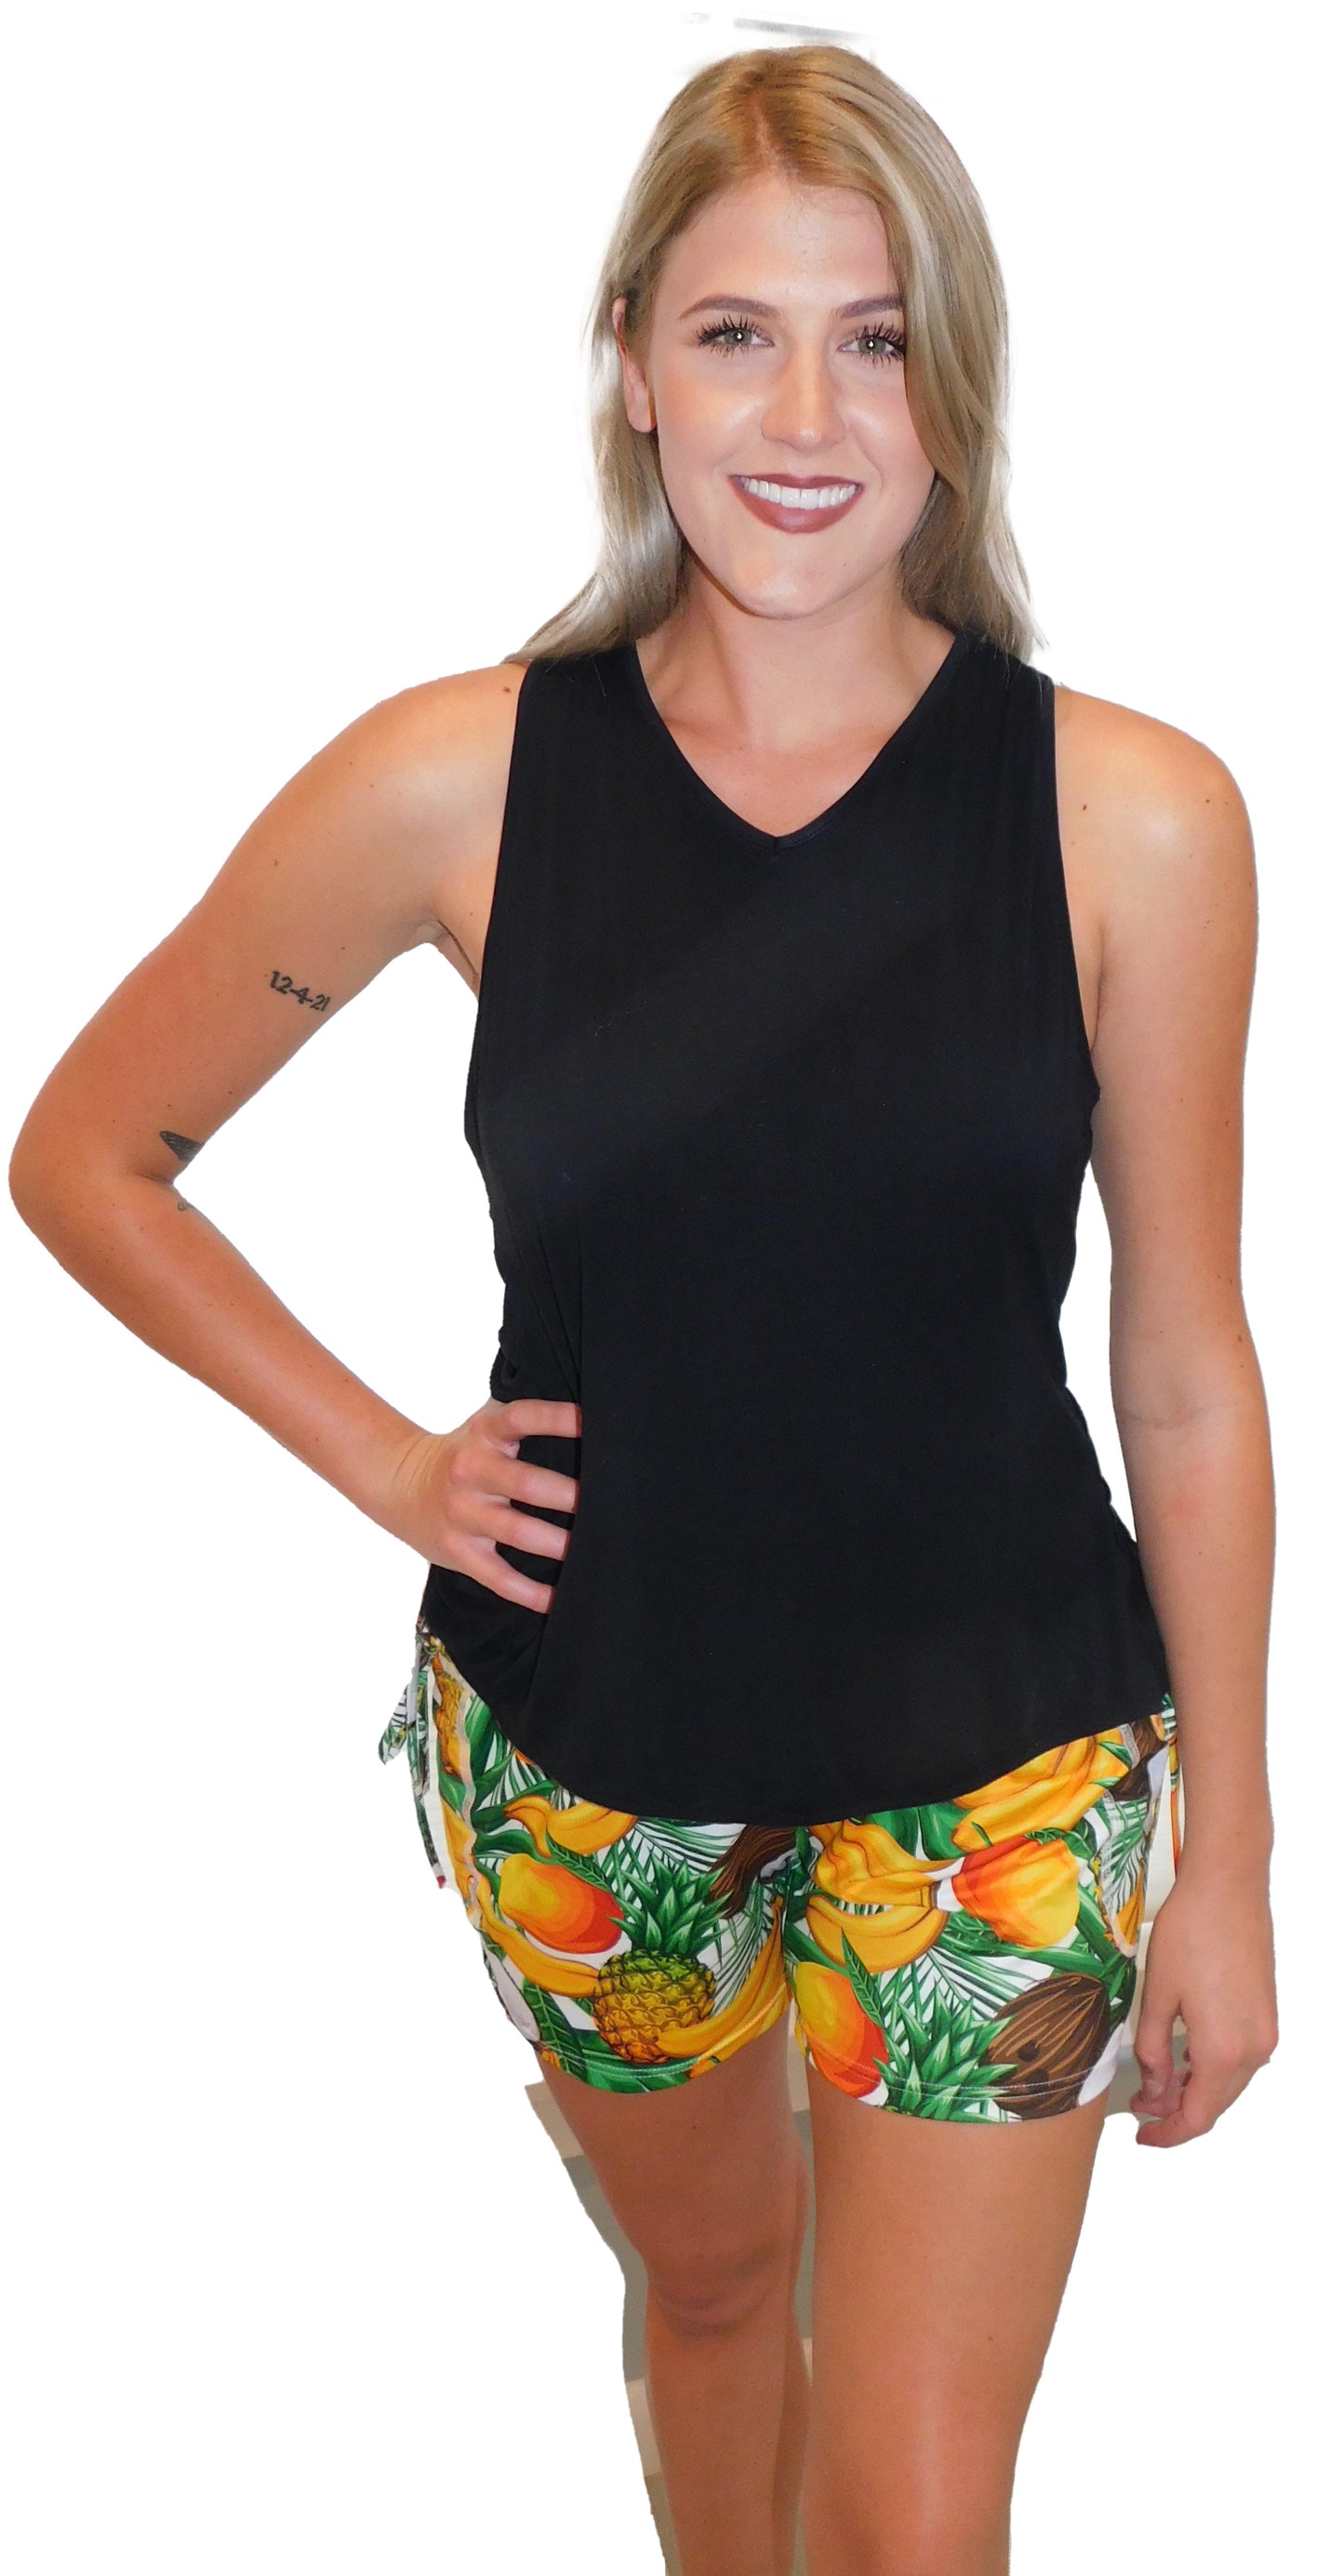 YOGAZ Eco-Friendly Black Bamboo BOW Tank Top in